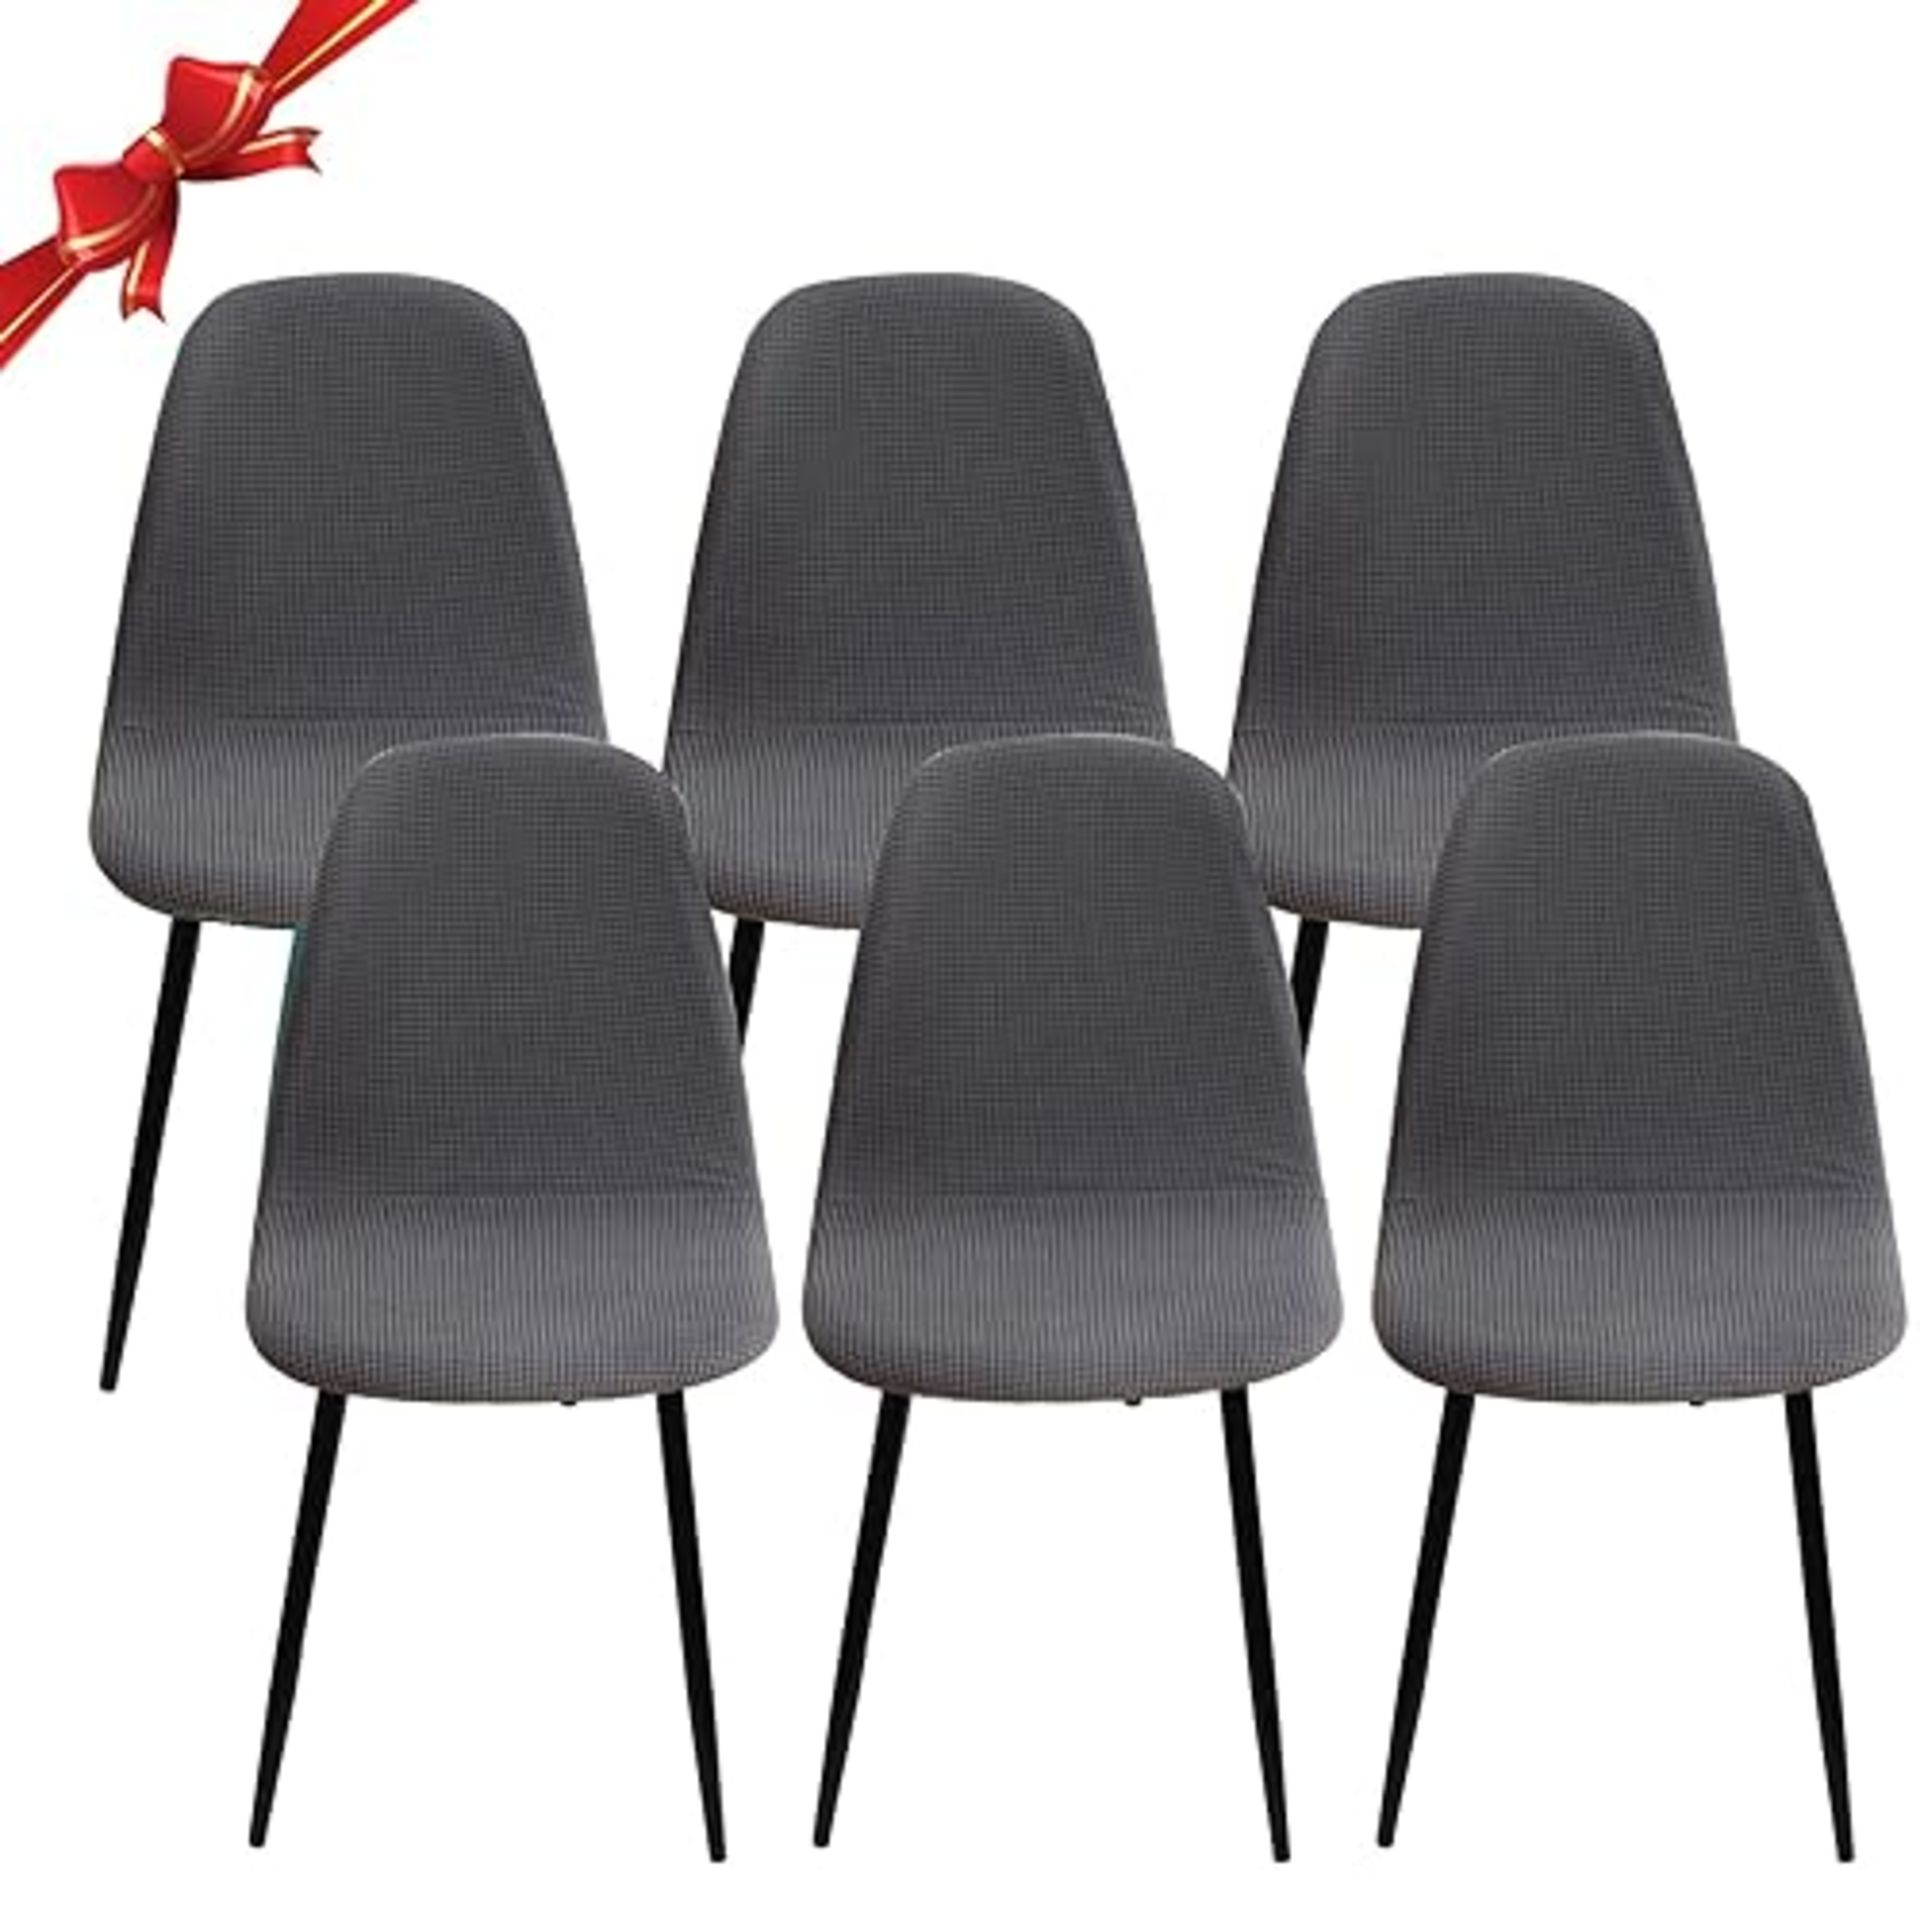 Jaotto Shell Chair Covers Set of 6,Stretch Shell Dining Chair Slipcovers,Jacquard Scandinavian Dini